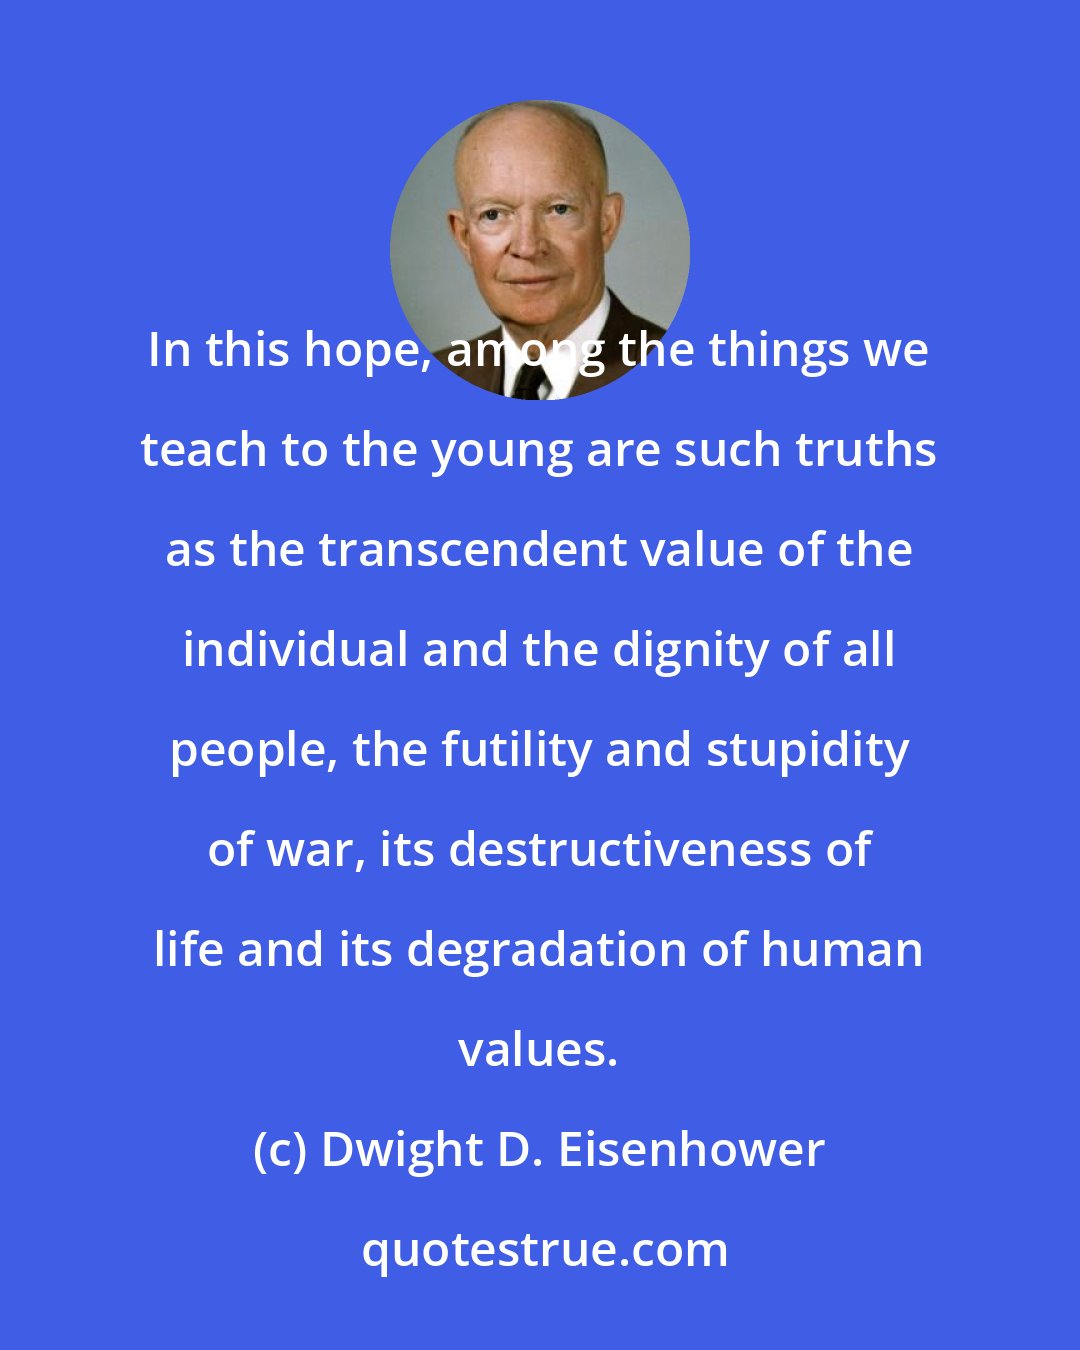 Dwight D. Eisenhower: In this hope, among the things we teach to the young are such truths as the transcendent value of the individual and the dignity of all people, the futility and stupidity of war, its destructiveness of life and its degradation of human values.